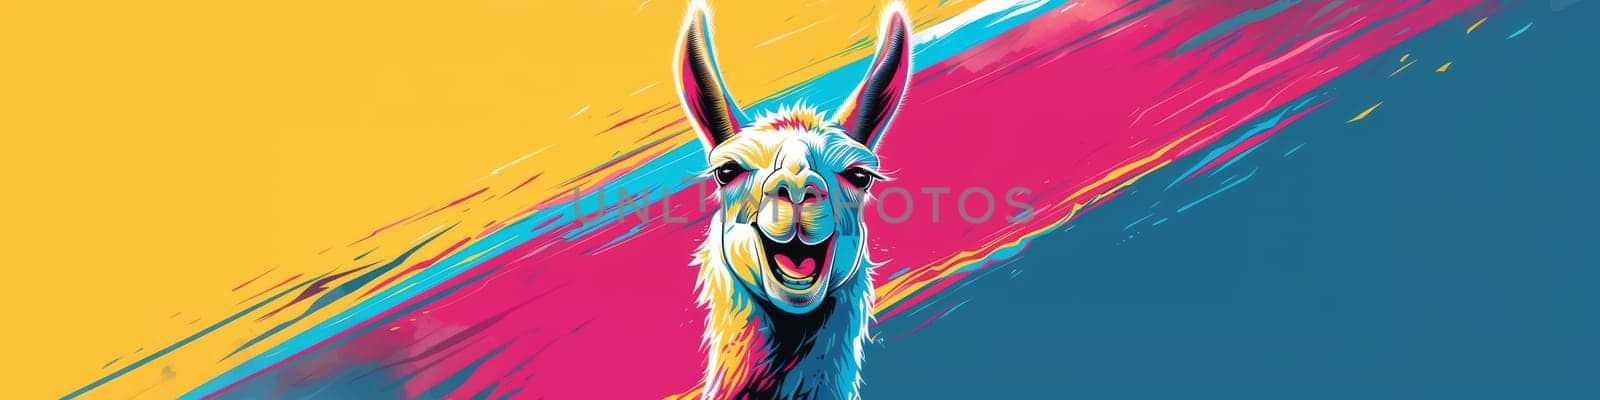 Laughing, happy lama on a colorful background